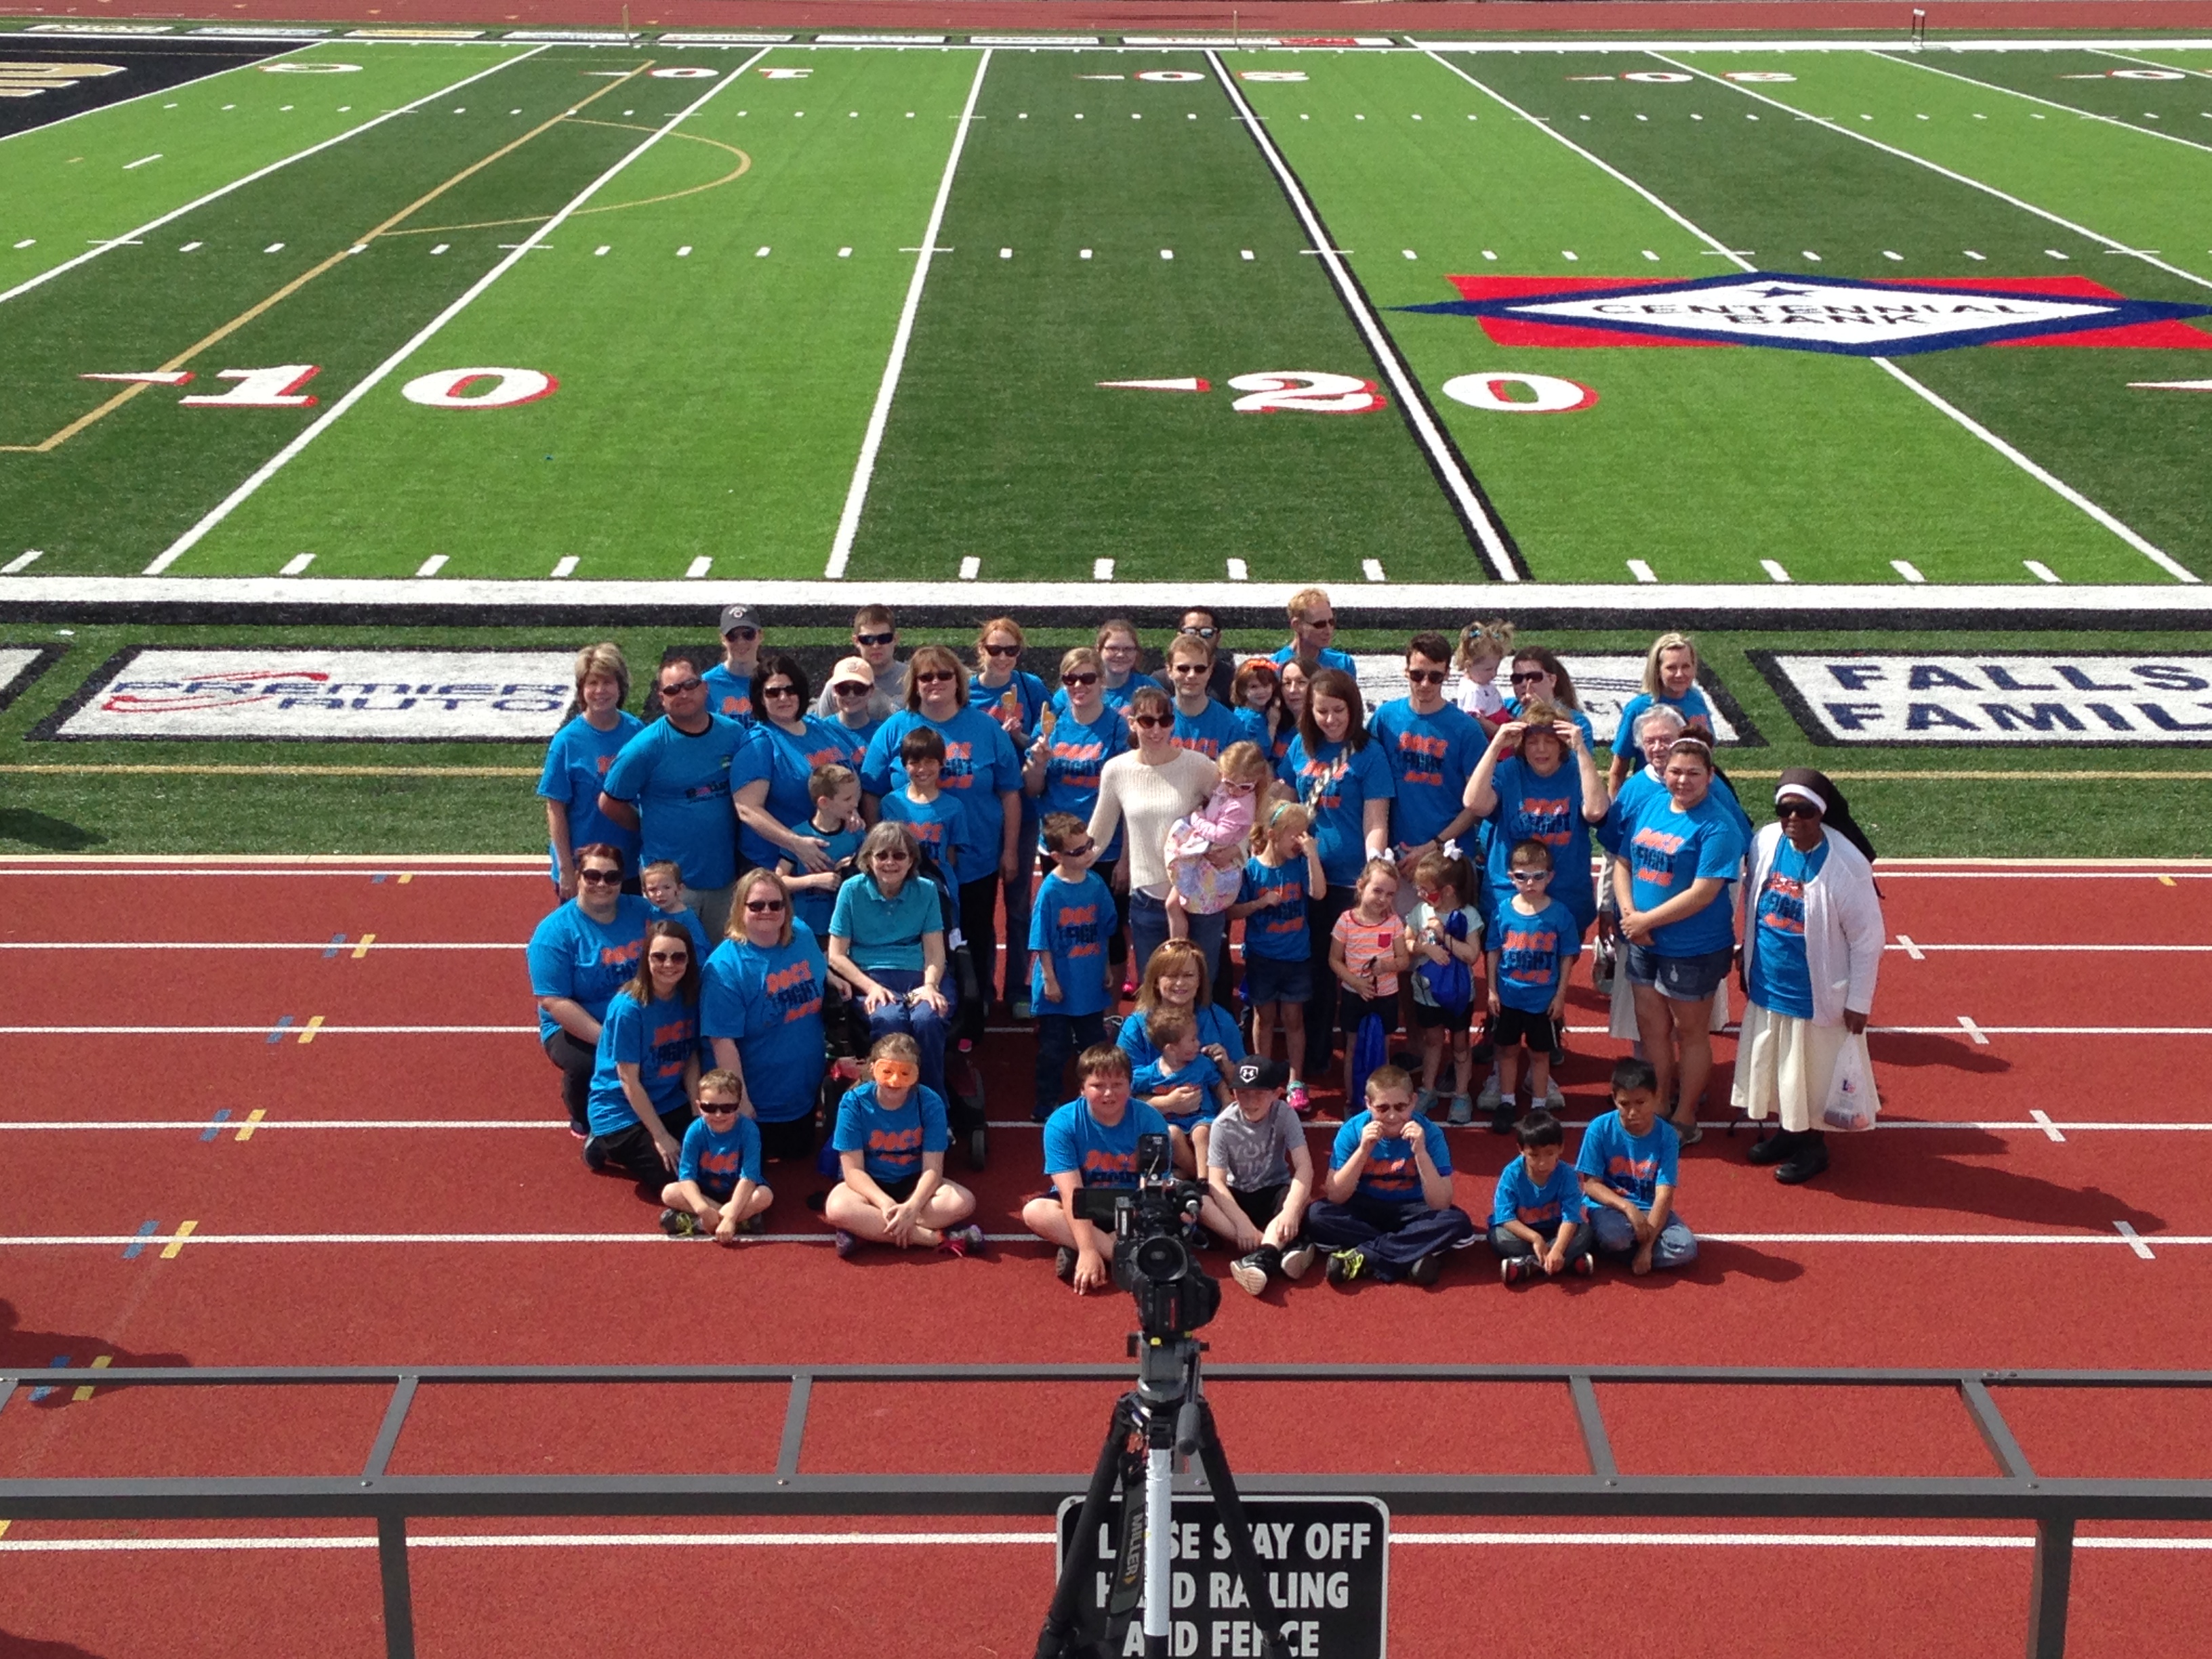 The Children’s Clinic recently participated in the Walk MS – Northeast Arkansas on team Docs Fight MS Walk on April 26, 2014 at Jonesboro High School. Docs fight MS raised 11,340.00 […]